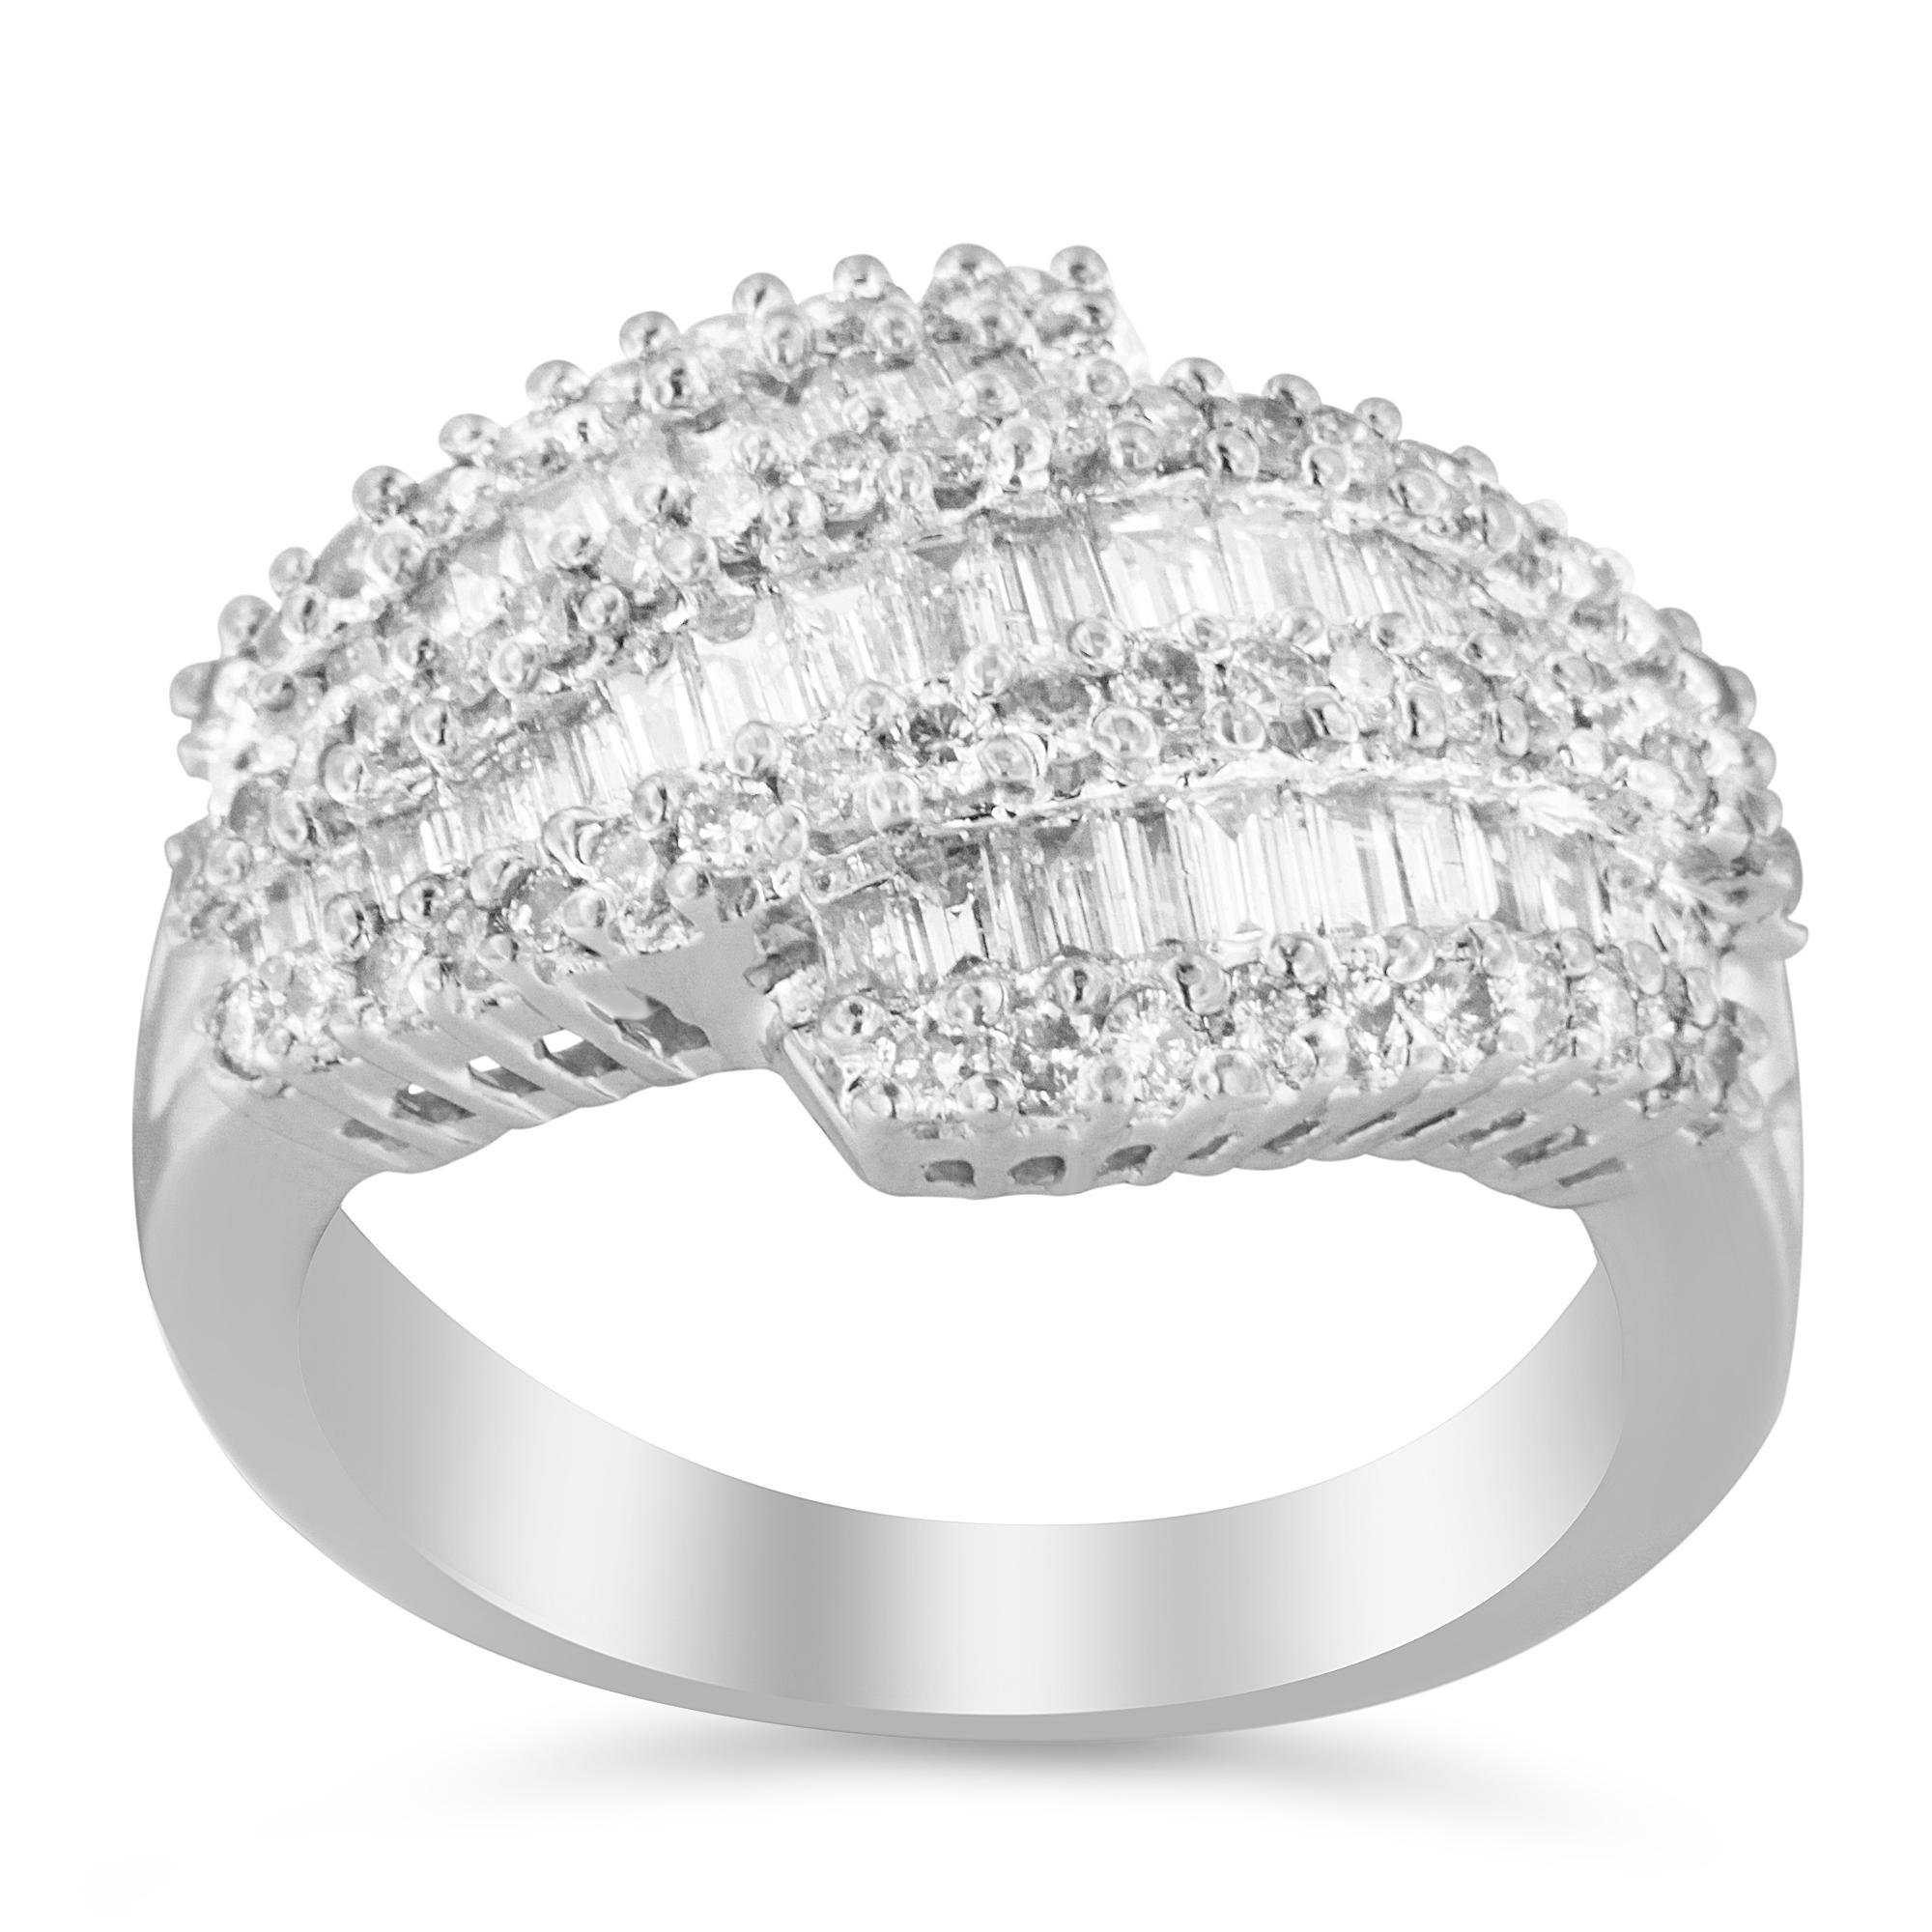 For Sale:  14K White Gold 1 3/4 Carat Diamond Cocktail Ring Band 3